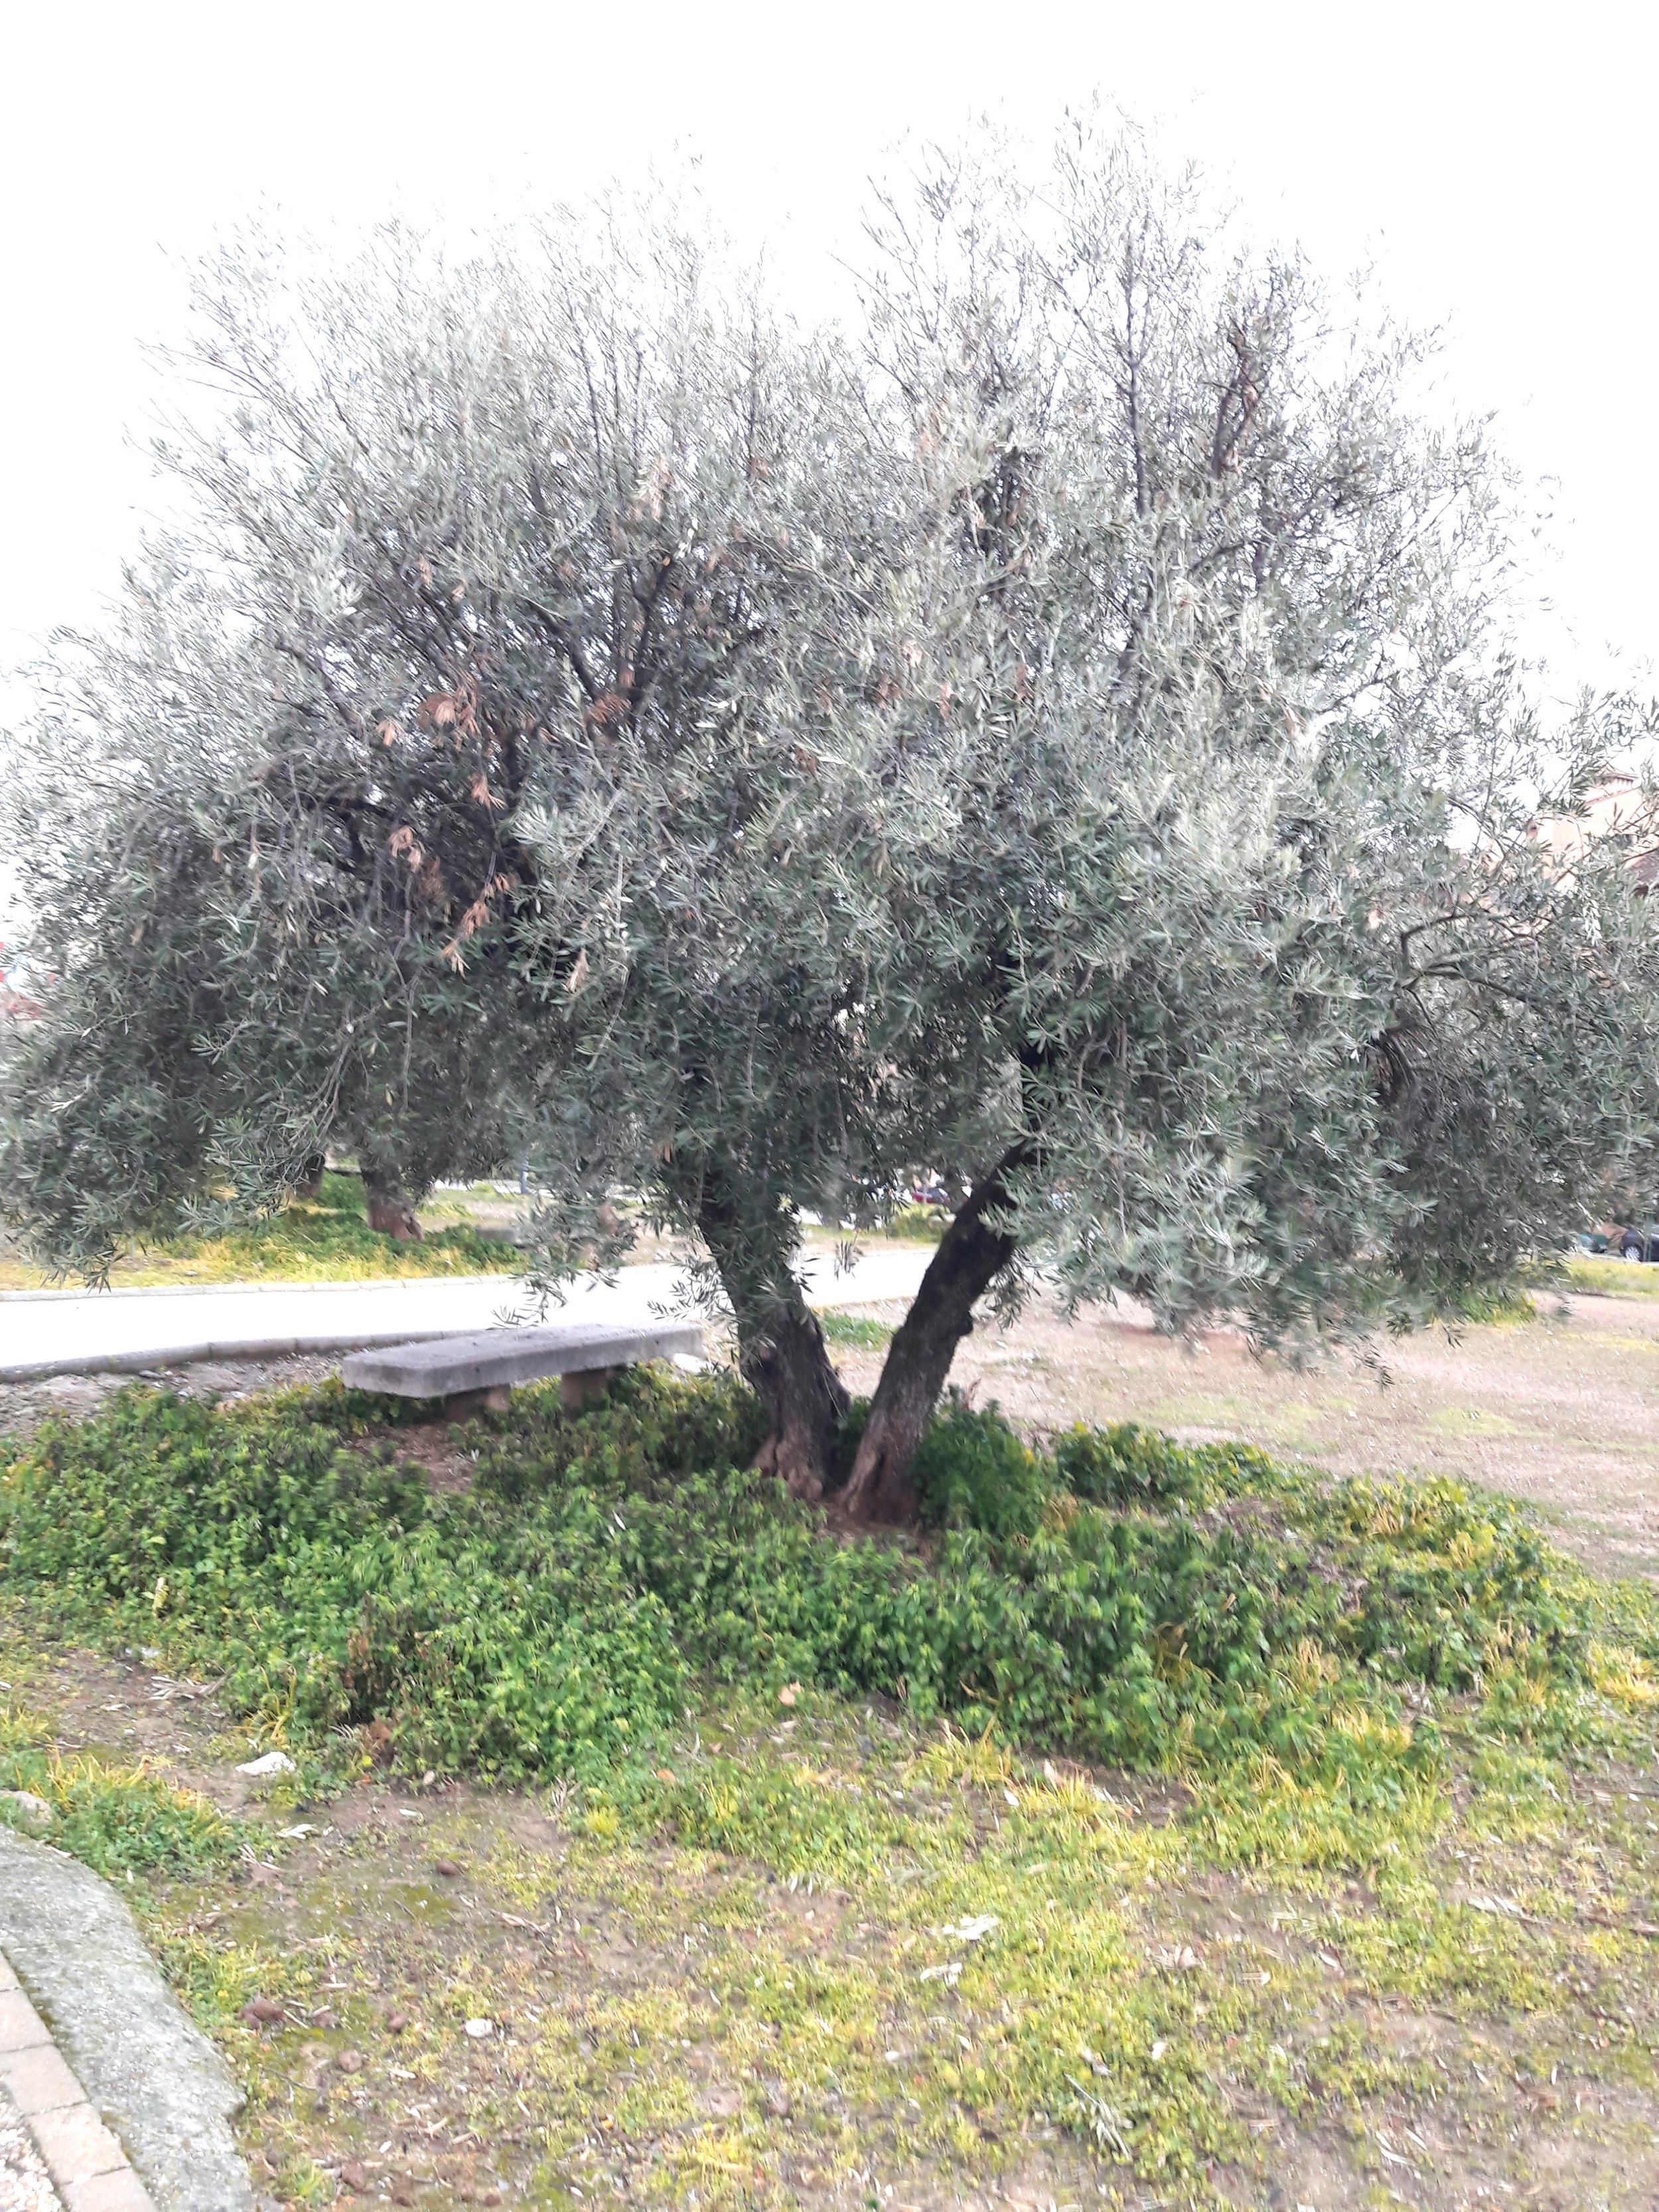 An olive tree now grows in the spot Lorca is thought to have been shot.